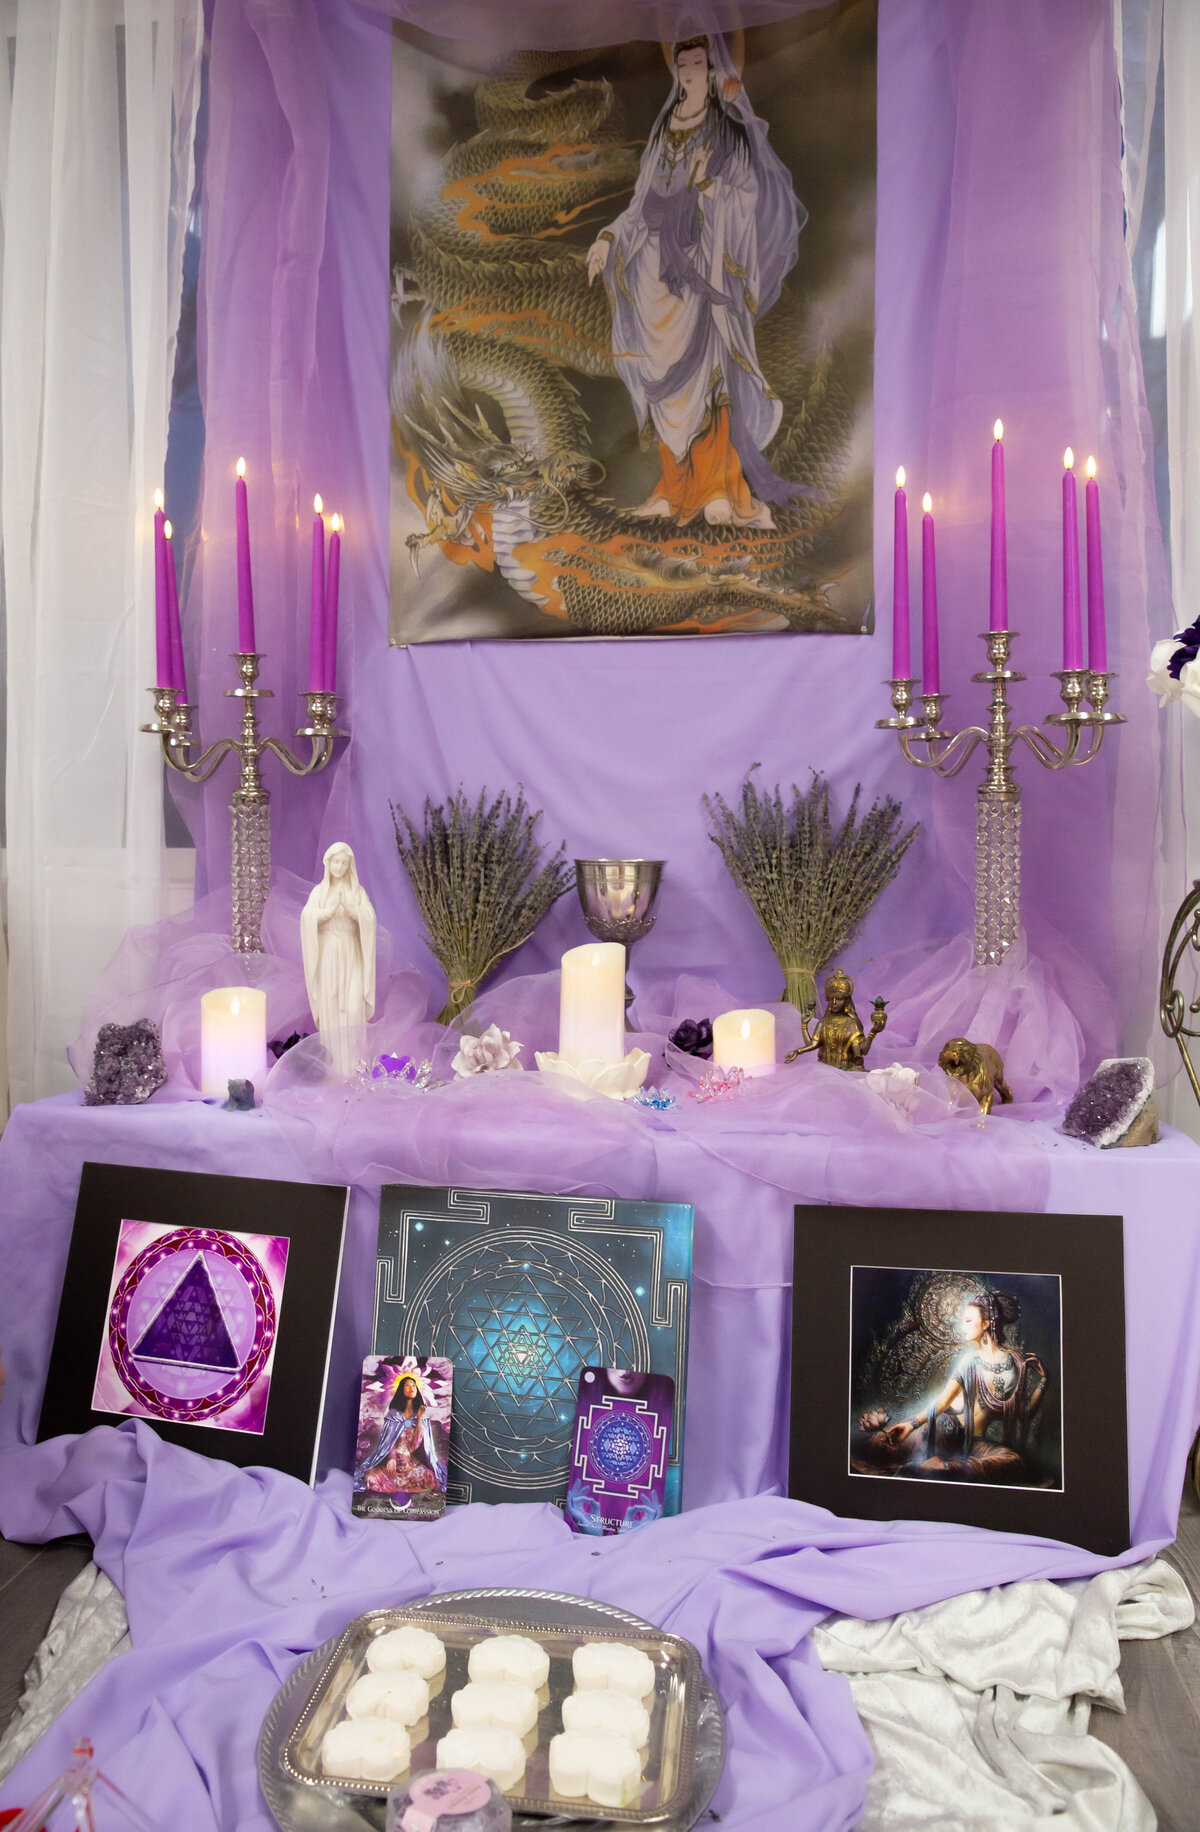 goddess studio events for women sacred goddess archetype goddess of compassion altar quan yin mother mary moon cakes violet lavender temple